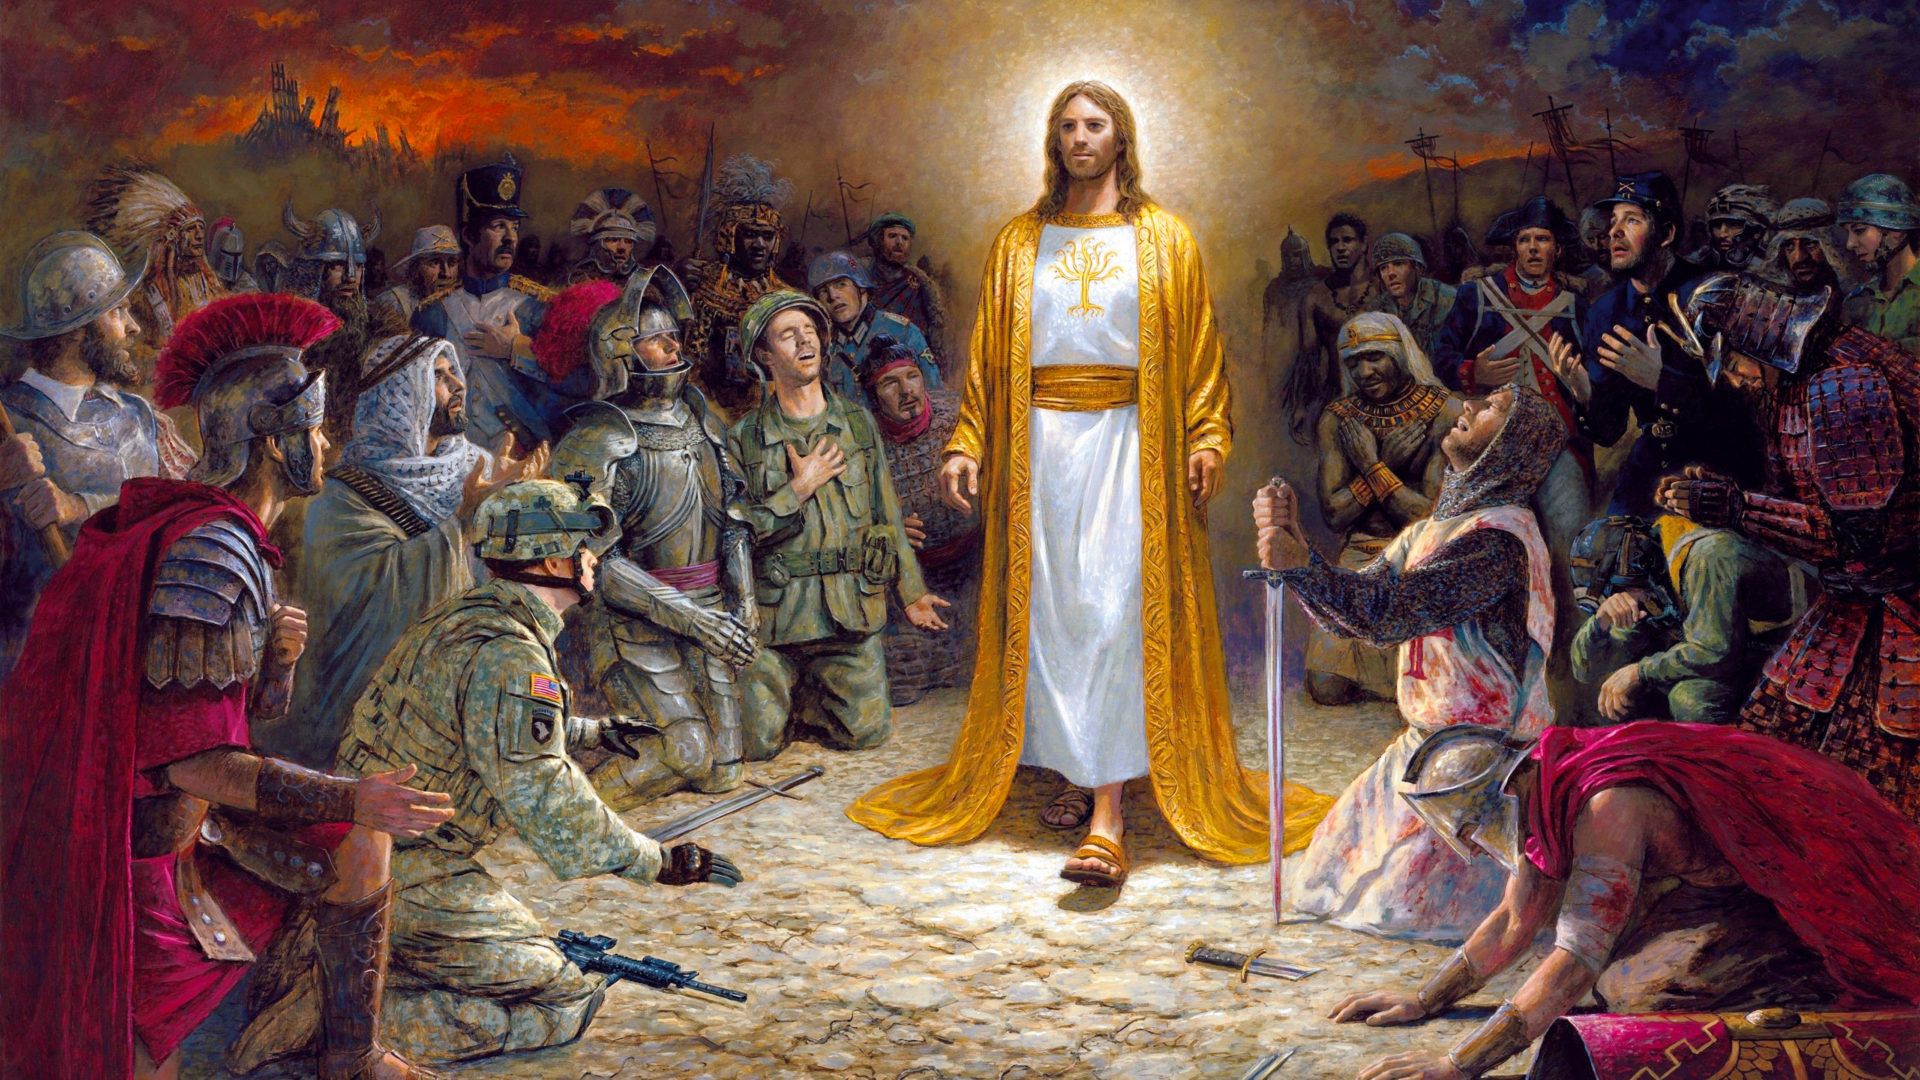 Jesus Christ Soldiers Praying Before The Lord For The Sins Committed 4k Ultra HD Desktop Wallpaper For Computers Laptop Tablet And Mobile Phones 3840x2400, Wallpaper13.com